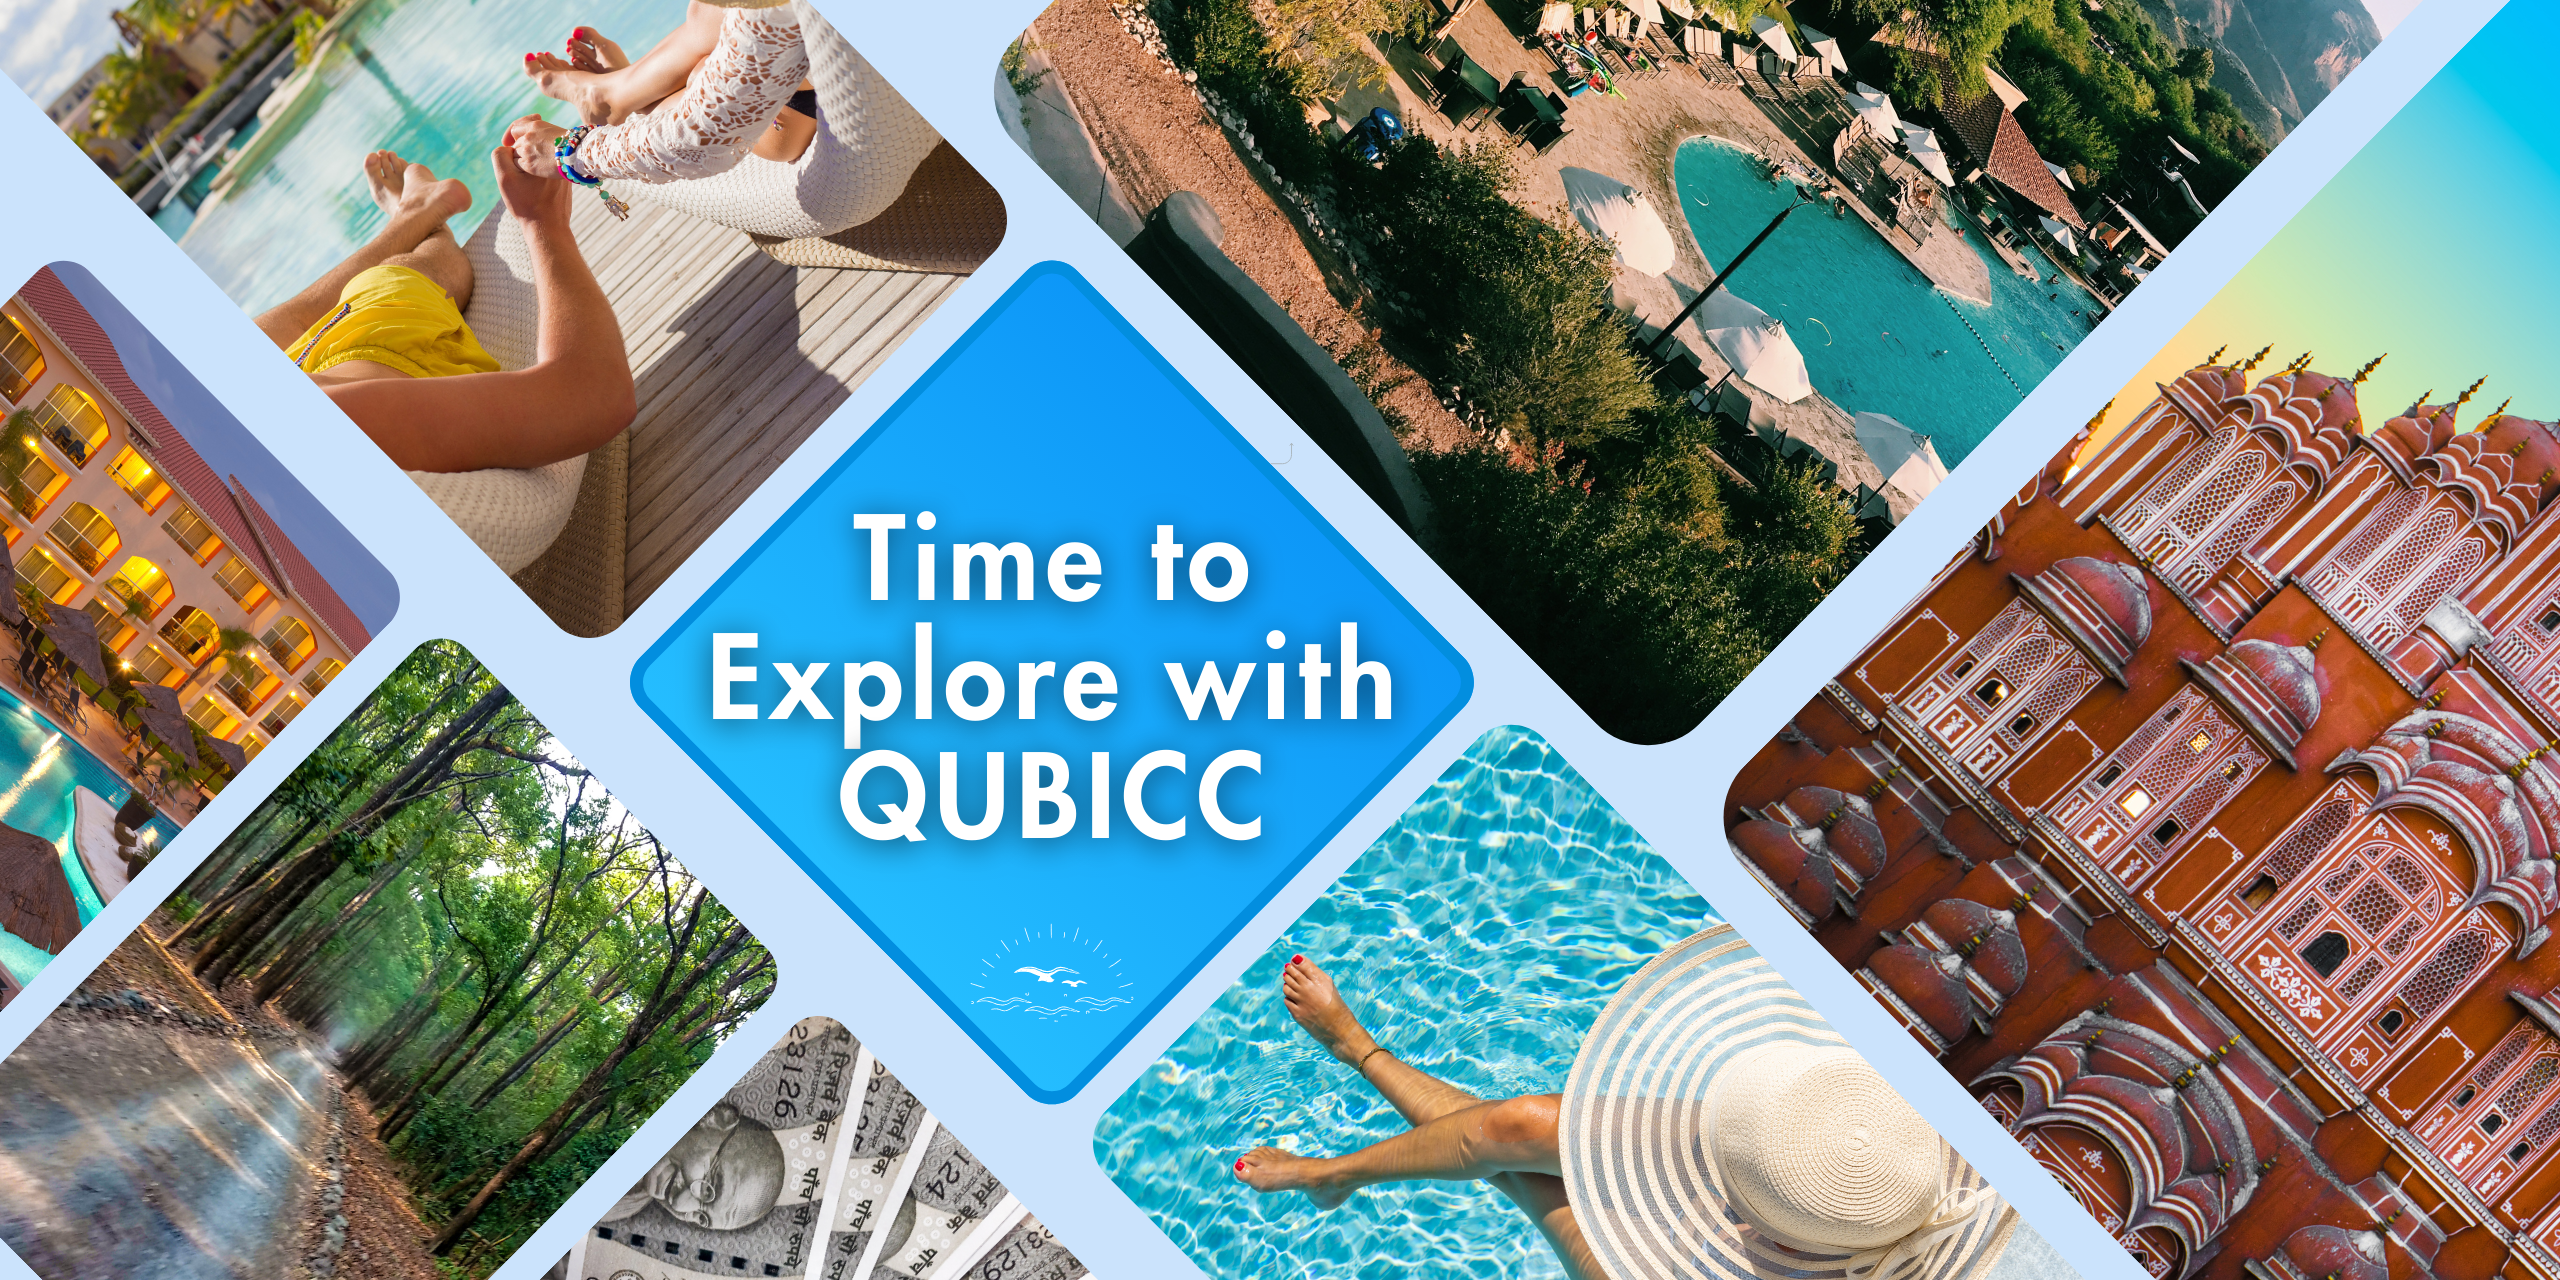 Investment in Brand Resorts has now became more easier with QUBICC